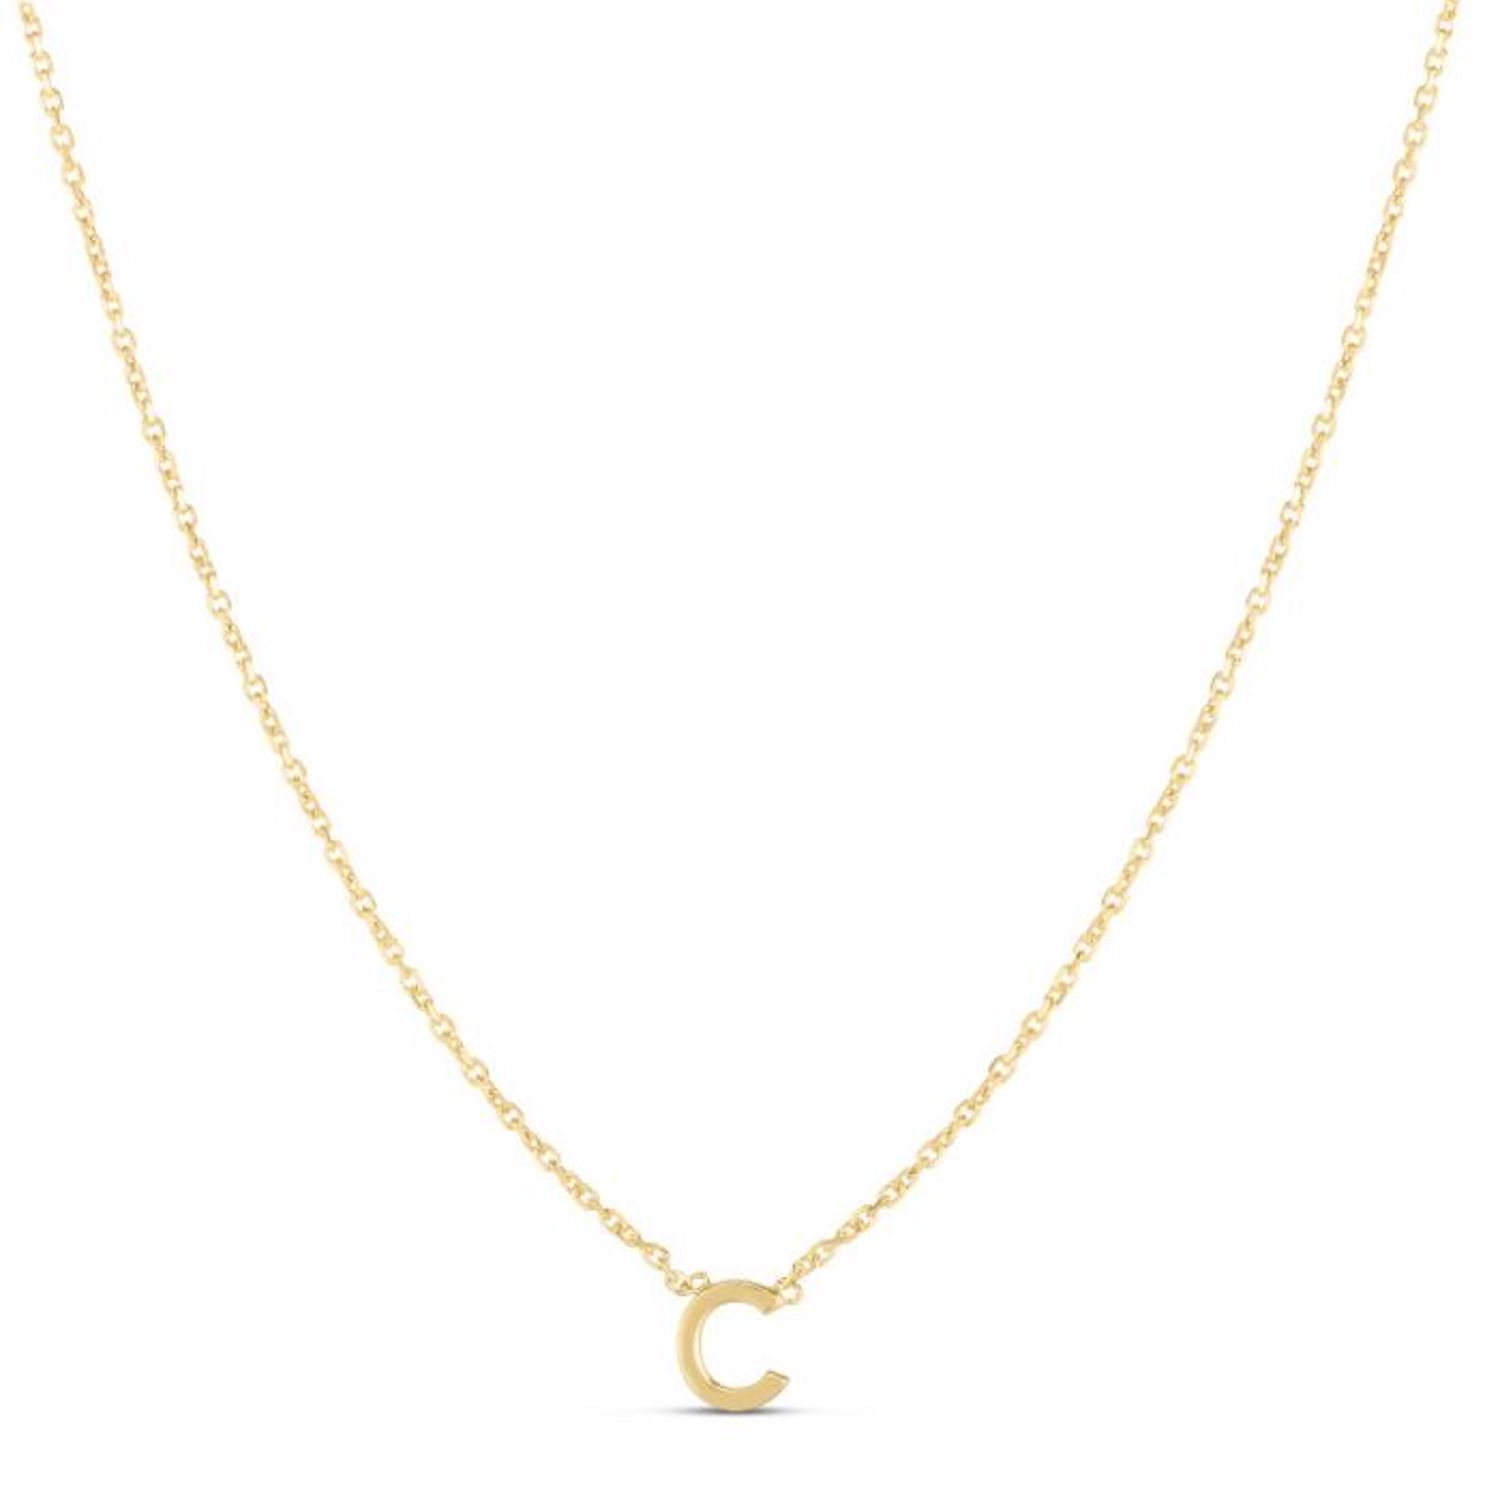 14K Yellow Gold Letter Initials Pendant Necklace 16"-18" - C